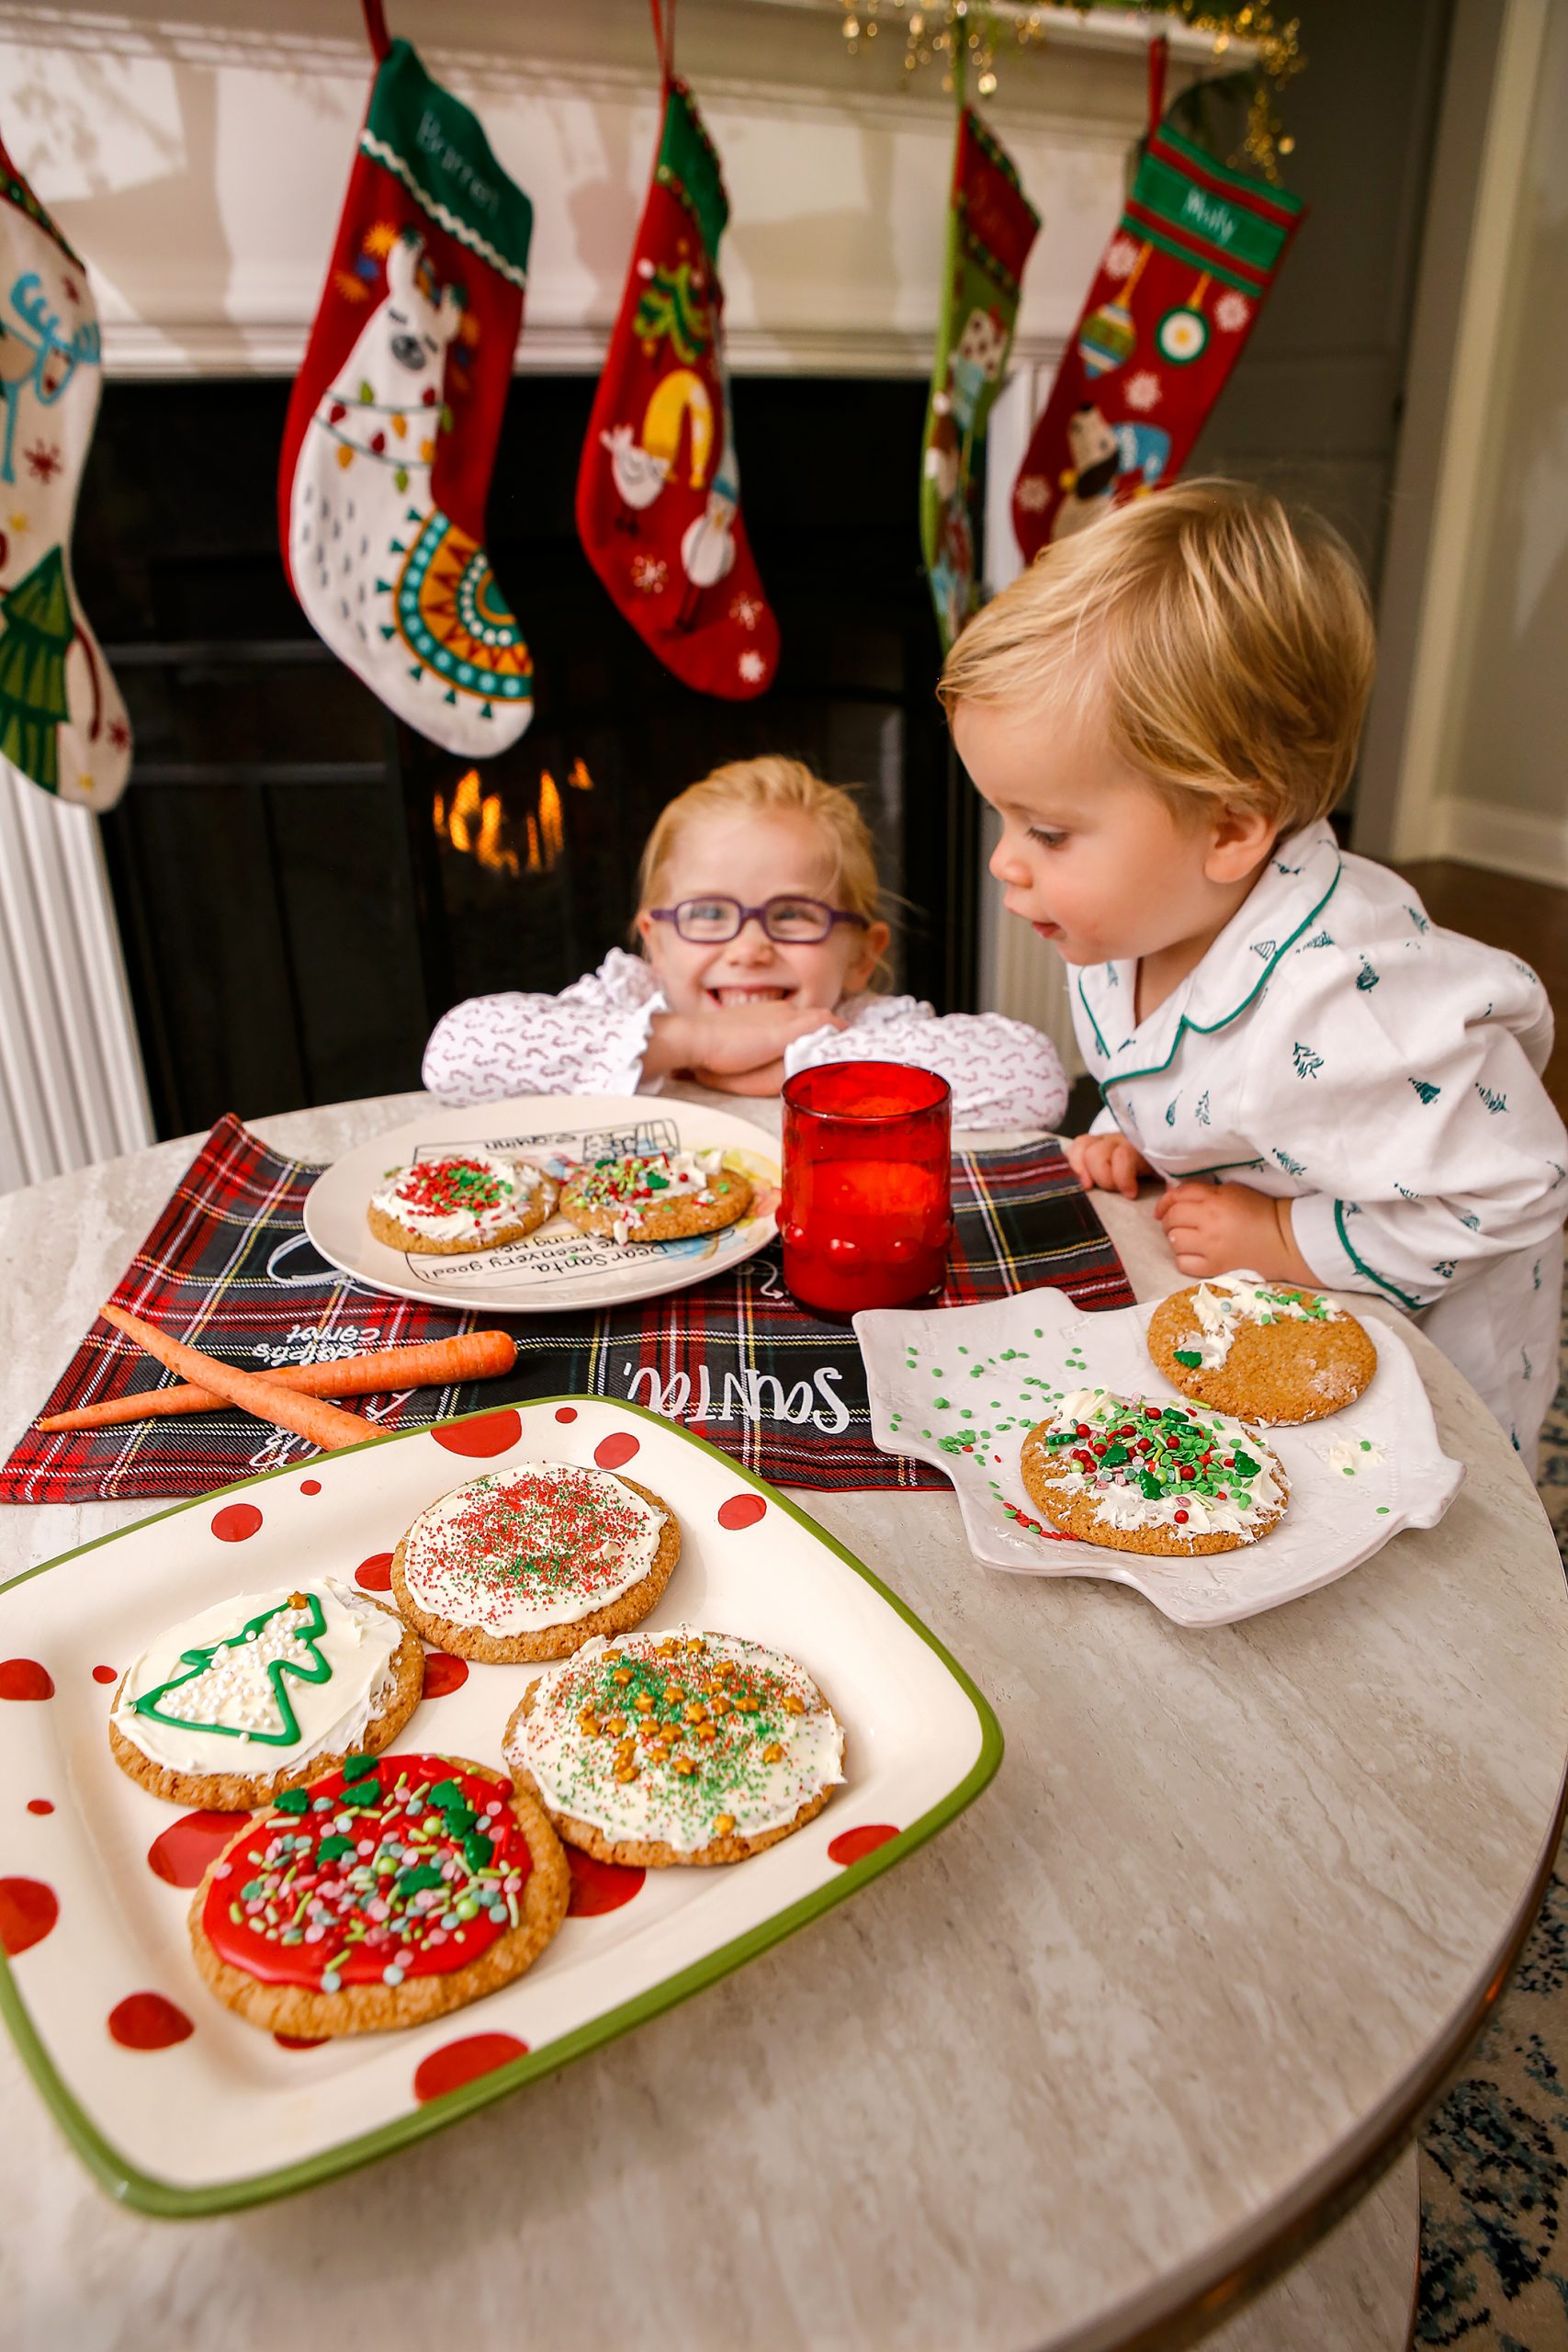 Quinn and Barret Schanz pile cookies on Quinn’s special Santa plate she made last year at the “Santa and Me” celebration at the Prisma Health Midlands Foundation’s Festival of Trees. Leaving a glass of milk for Santa and carrots for the reindeer are also a special tradition.